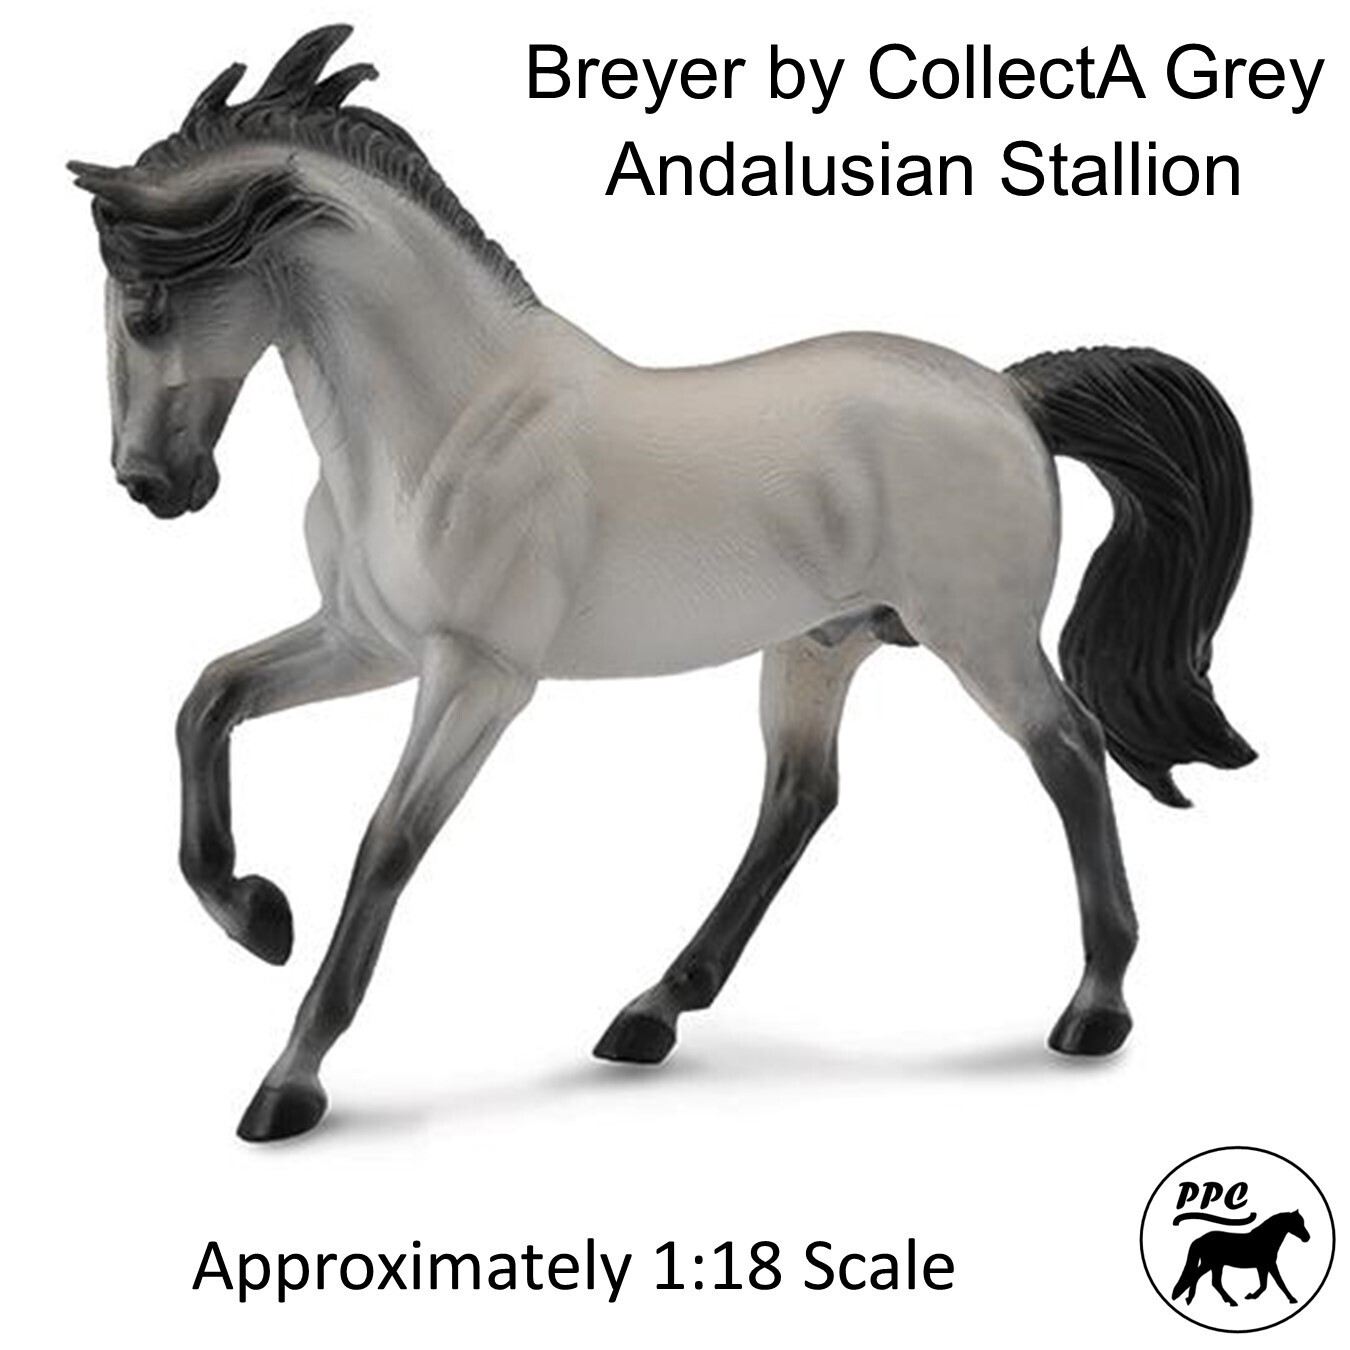 CollectA by Breyer Grey Andalusian Stallion